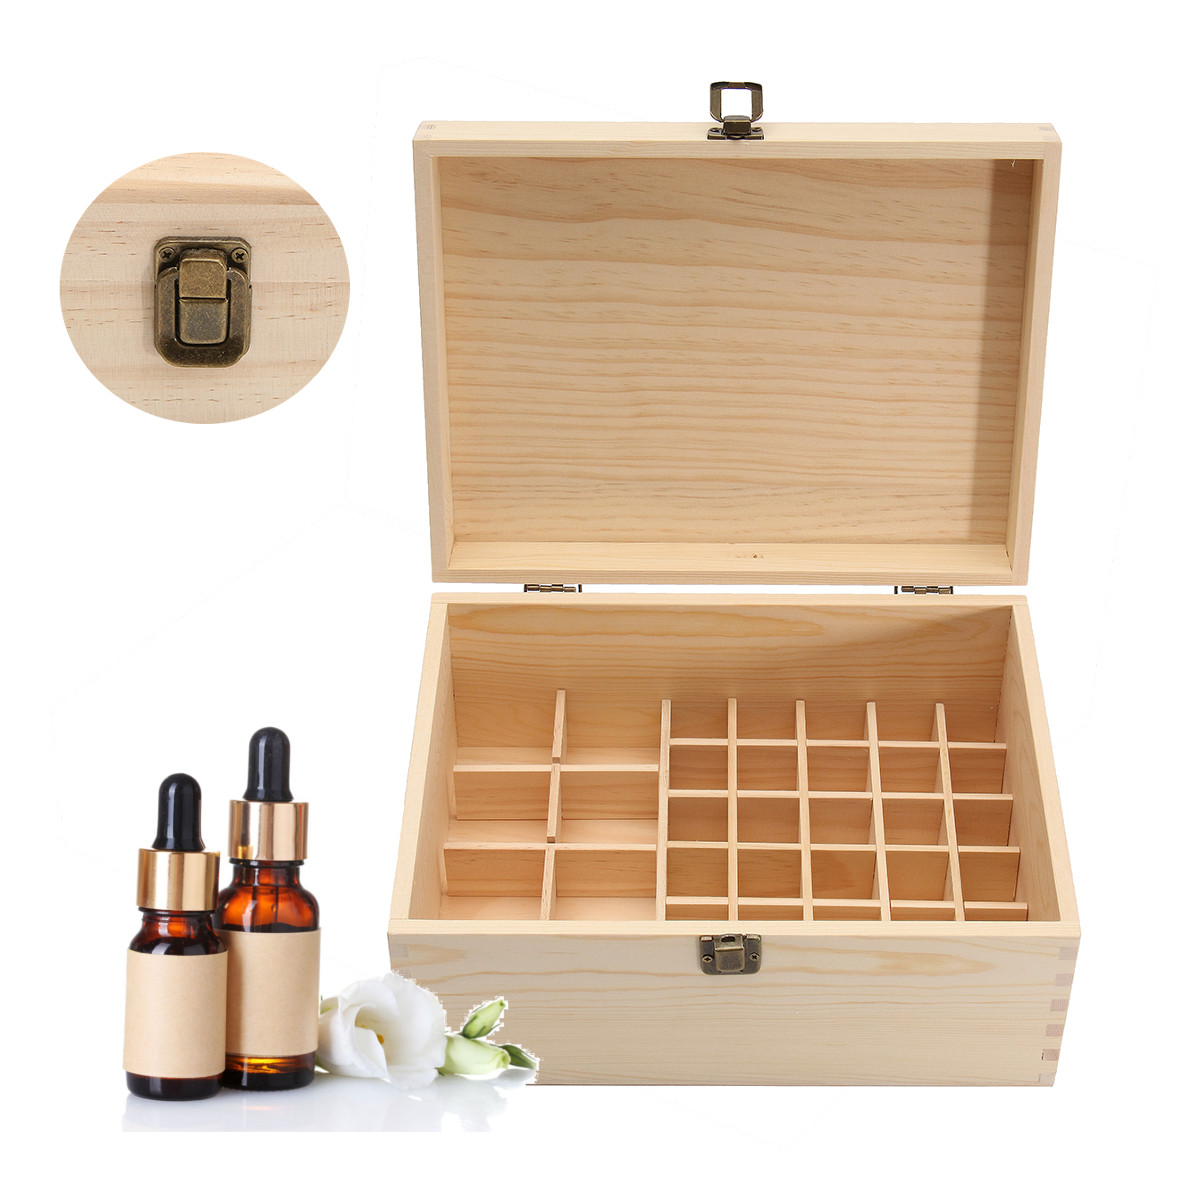 

38 Grids Wooden Bottles Box Container Organizer Storage for Essential Oil Aromatherapy